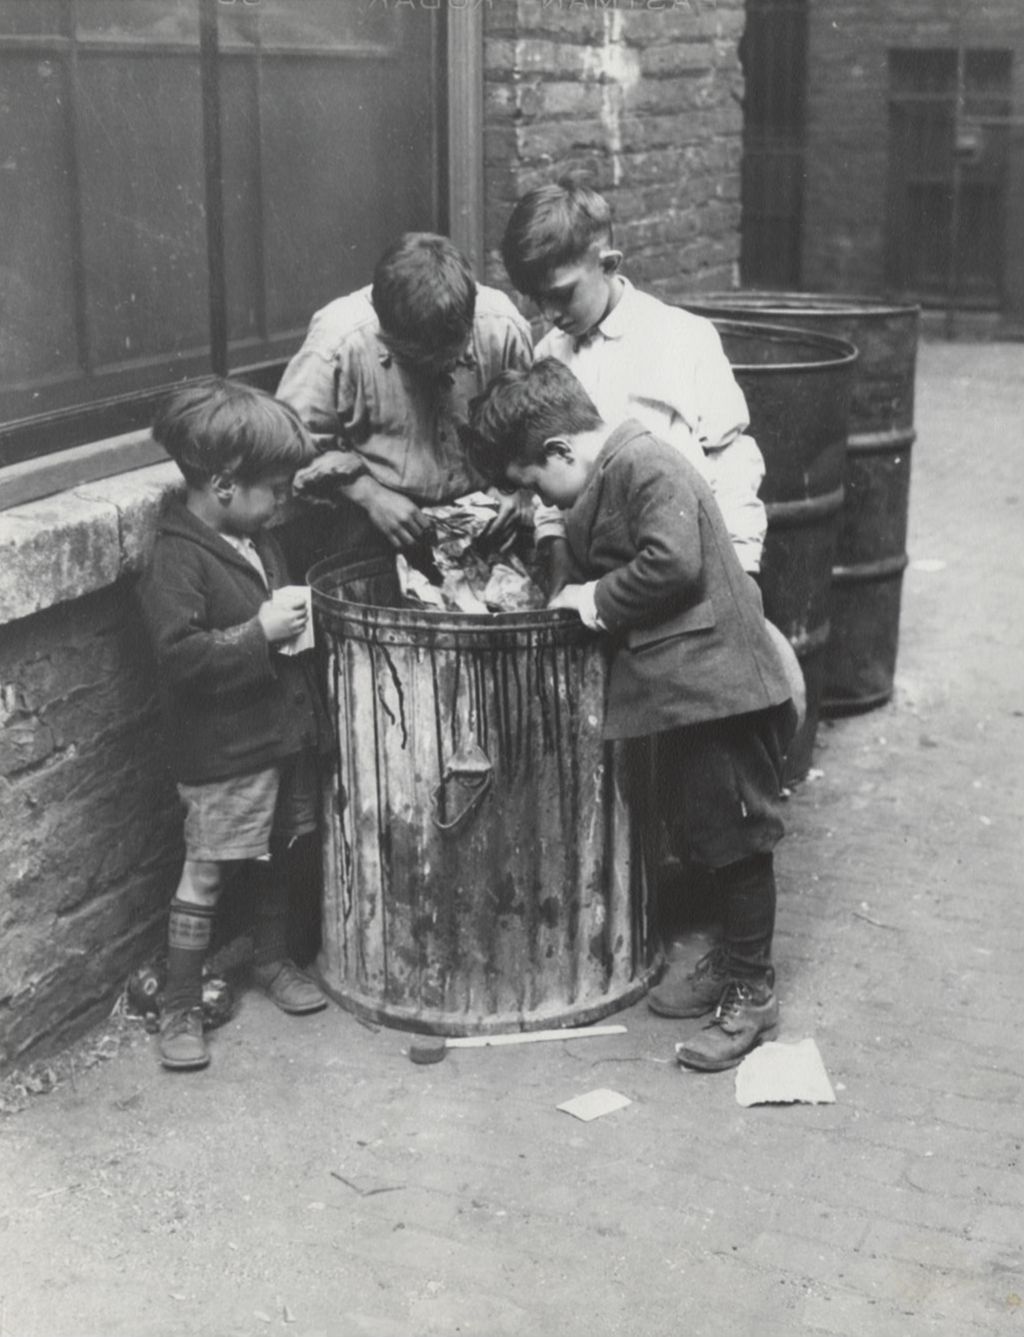 Miniature of Four boys digging through garbage can in alley